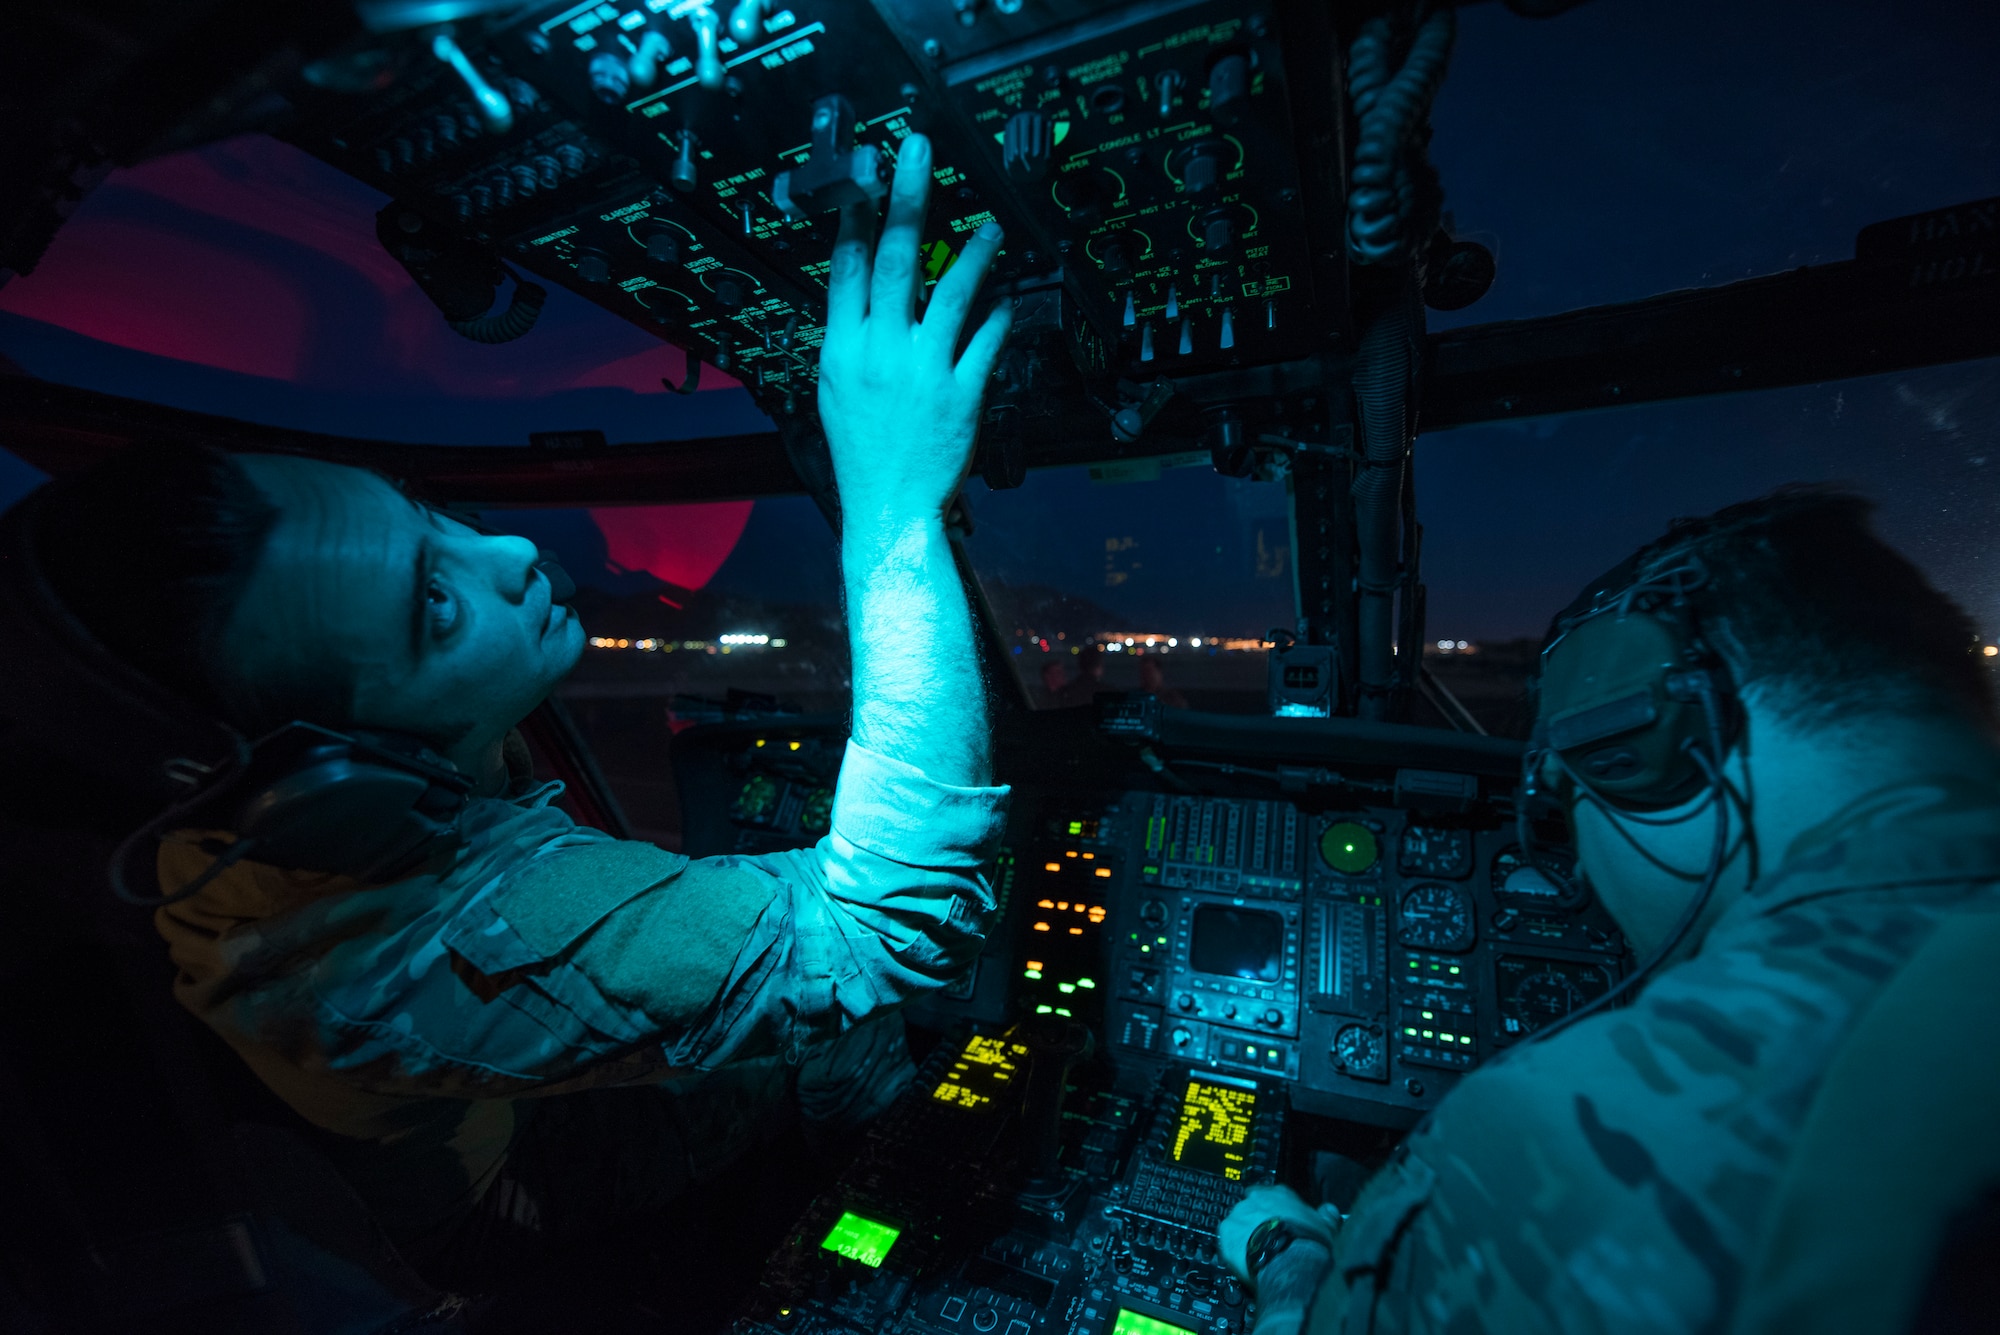 Tech Sgt. Jeremy Sutter, a special missions aviator assigned to the 34th Weapons Squadron, runs avionics checks on an HH-60G Pave Hawk helicopter June 11, 2018 at Nellis Air Force Base, Nev. The crew was preparing for a U.S. Air Force Weapons School training scenario which tasked them with locating, recovering and providing initial medical treatments for a downed pilot. (U.S. Air Force photo by Staff Sgt. Joshua Kleinholz)